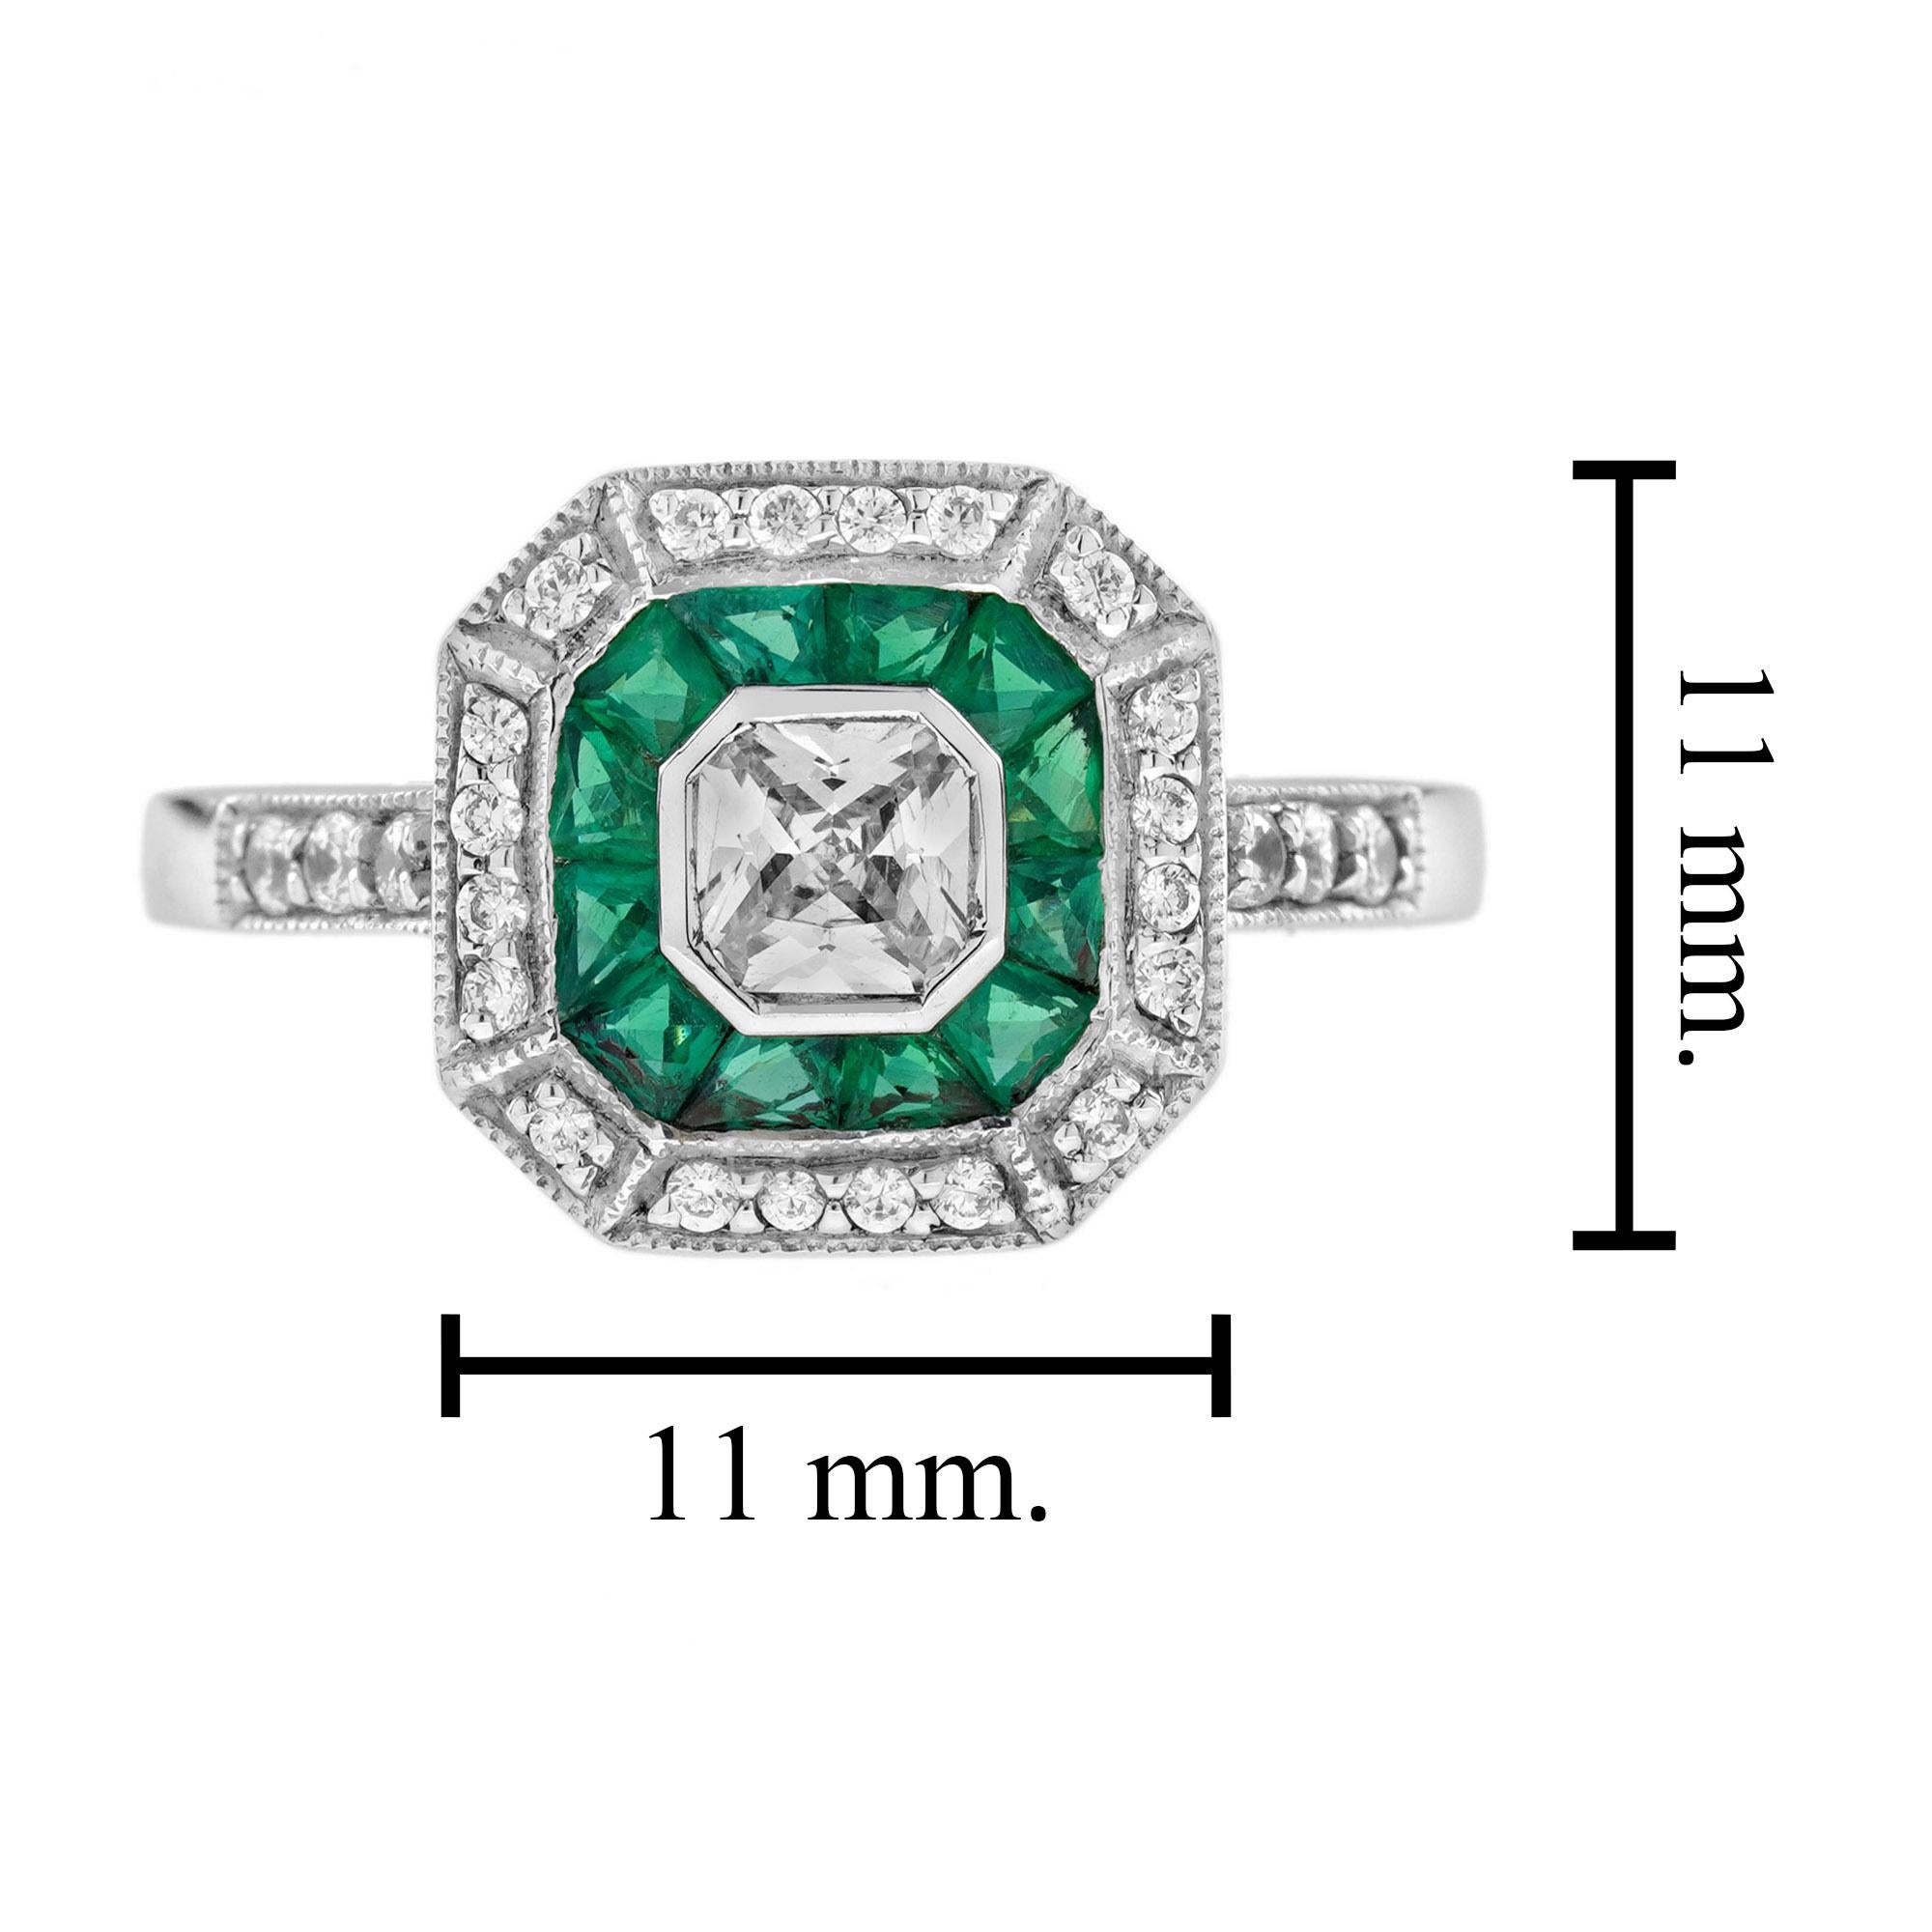 For Sale:  Diamond and Emerald Double Halo Art Deco Style Engagement Ring in 18K White Gold 7